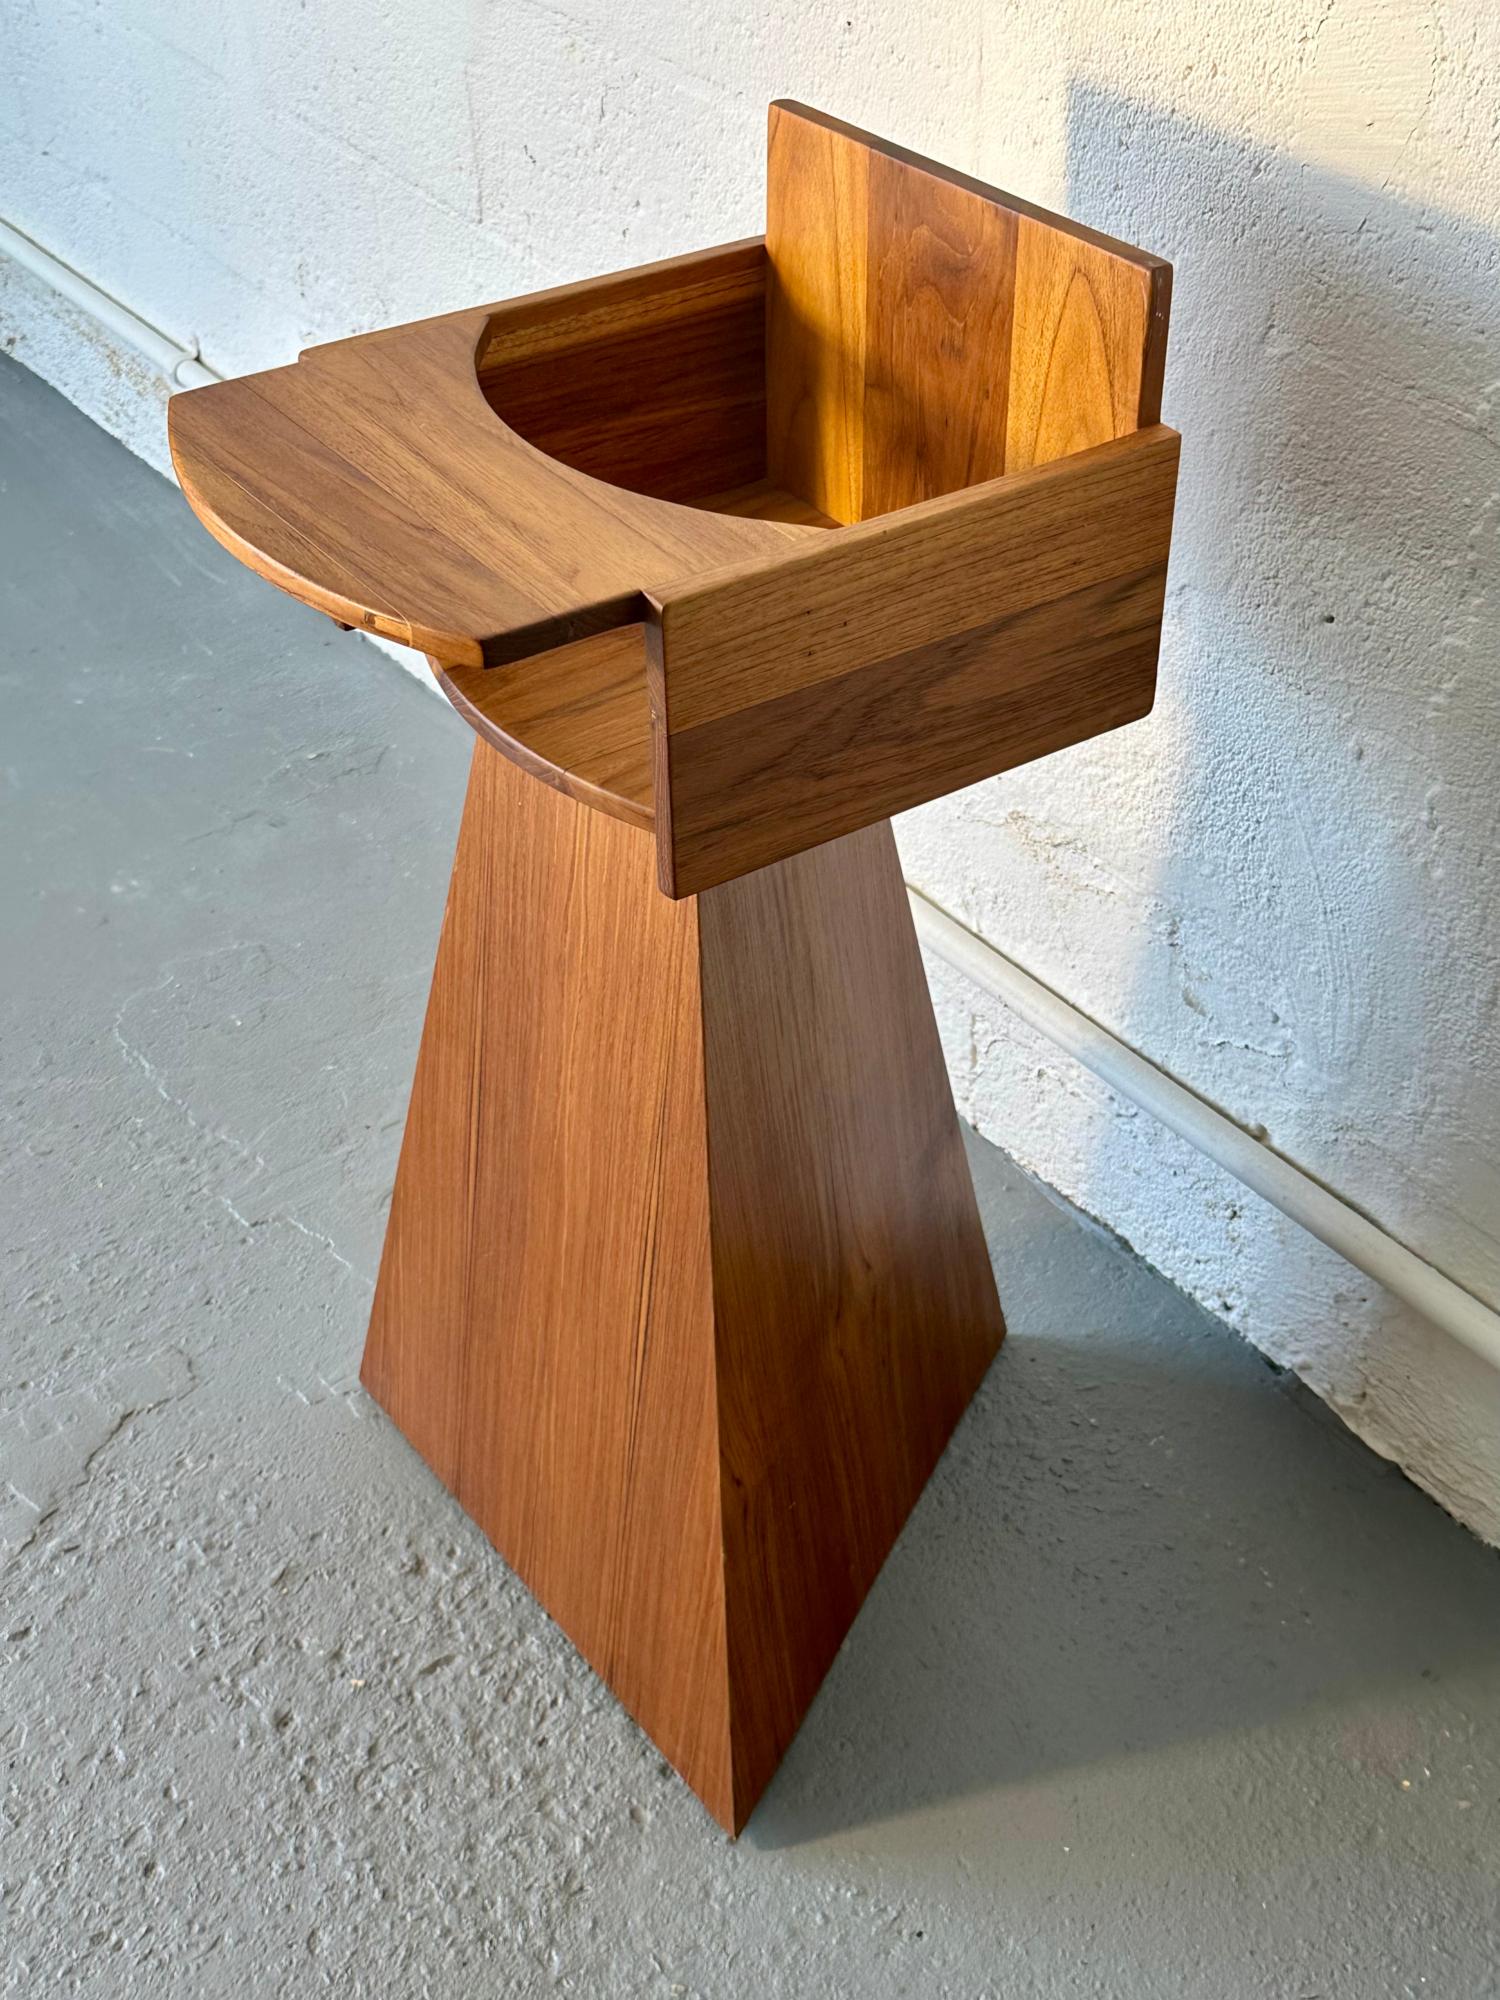 Rafael designed and handcrafted the Enzo Baby High Chair using teak wood.

Rafael loves to work with teak for its handsome appearance, robust stability, durability, and natural resistance to the elements. It has a straight grain and a distinctly